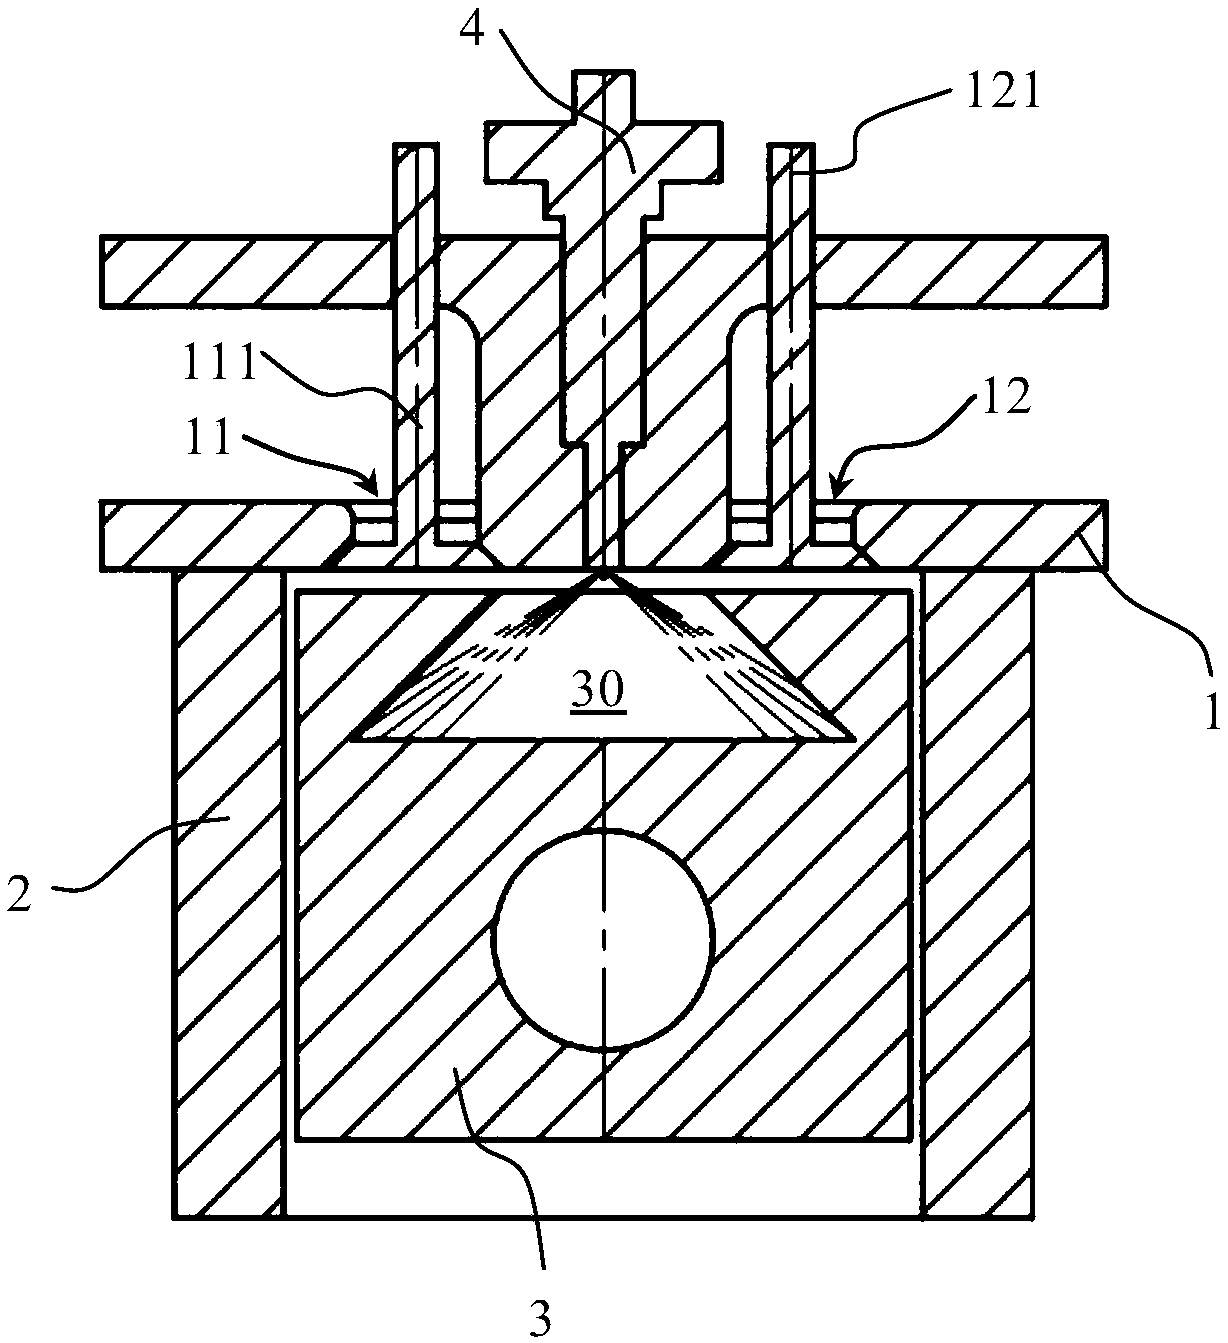 Piston for use in engine cylinder and piston engine